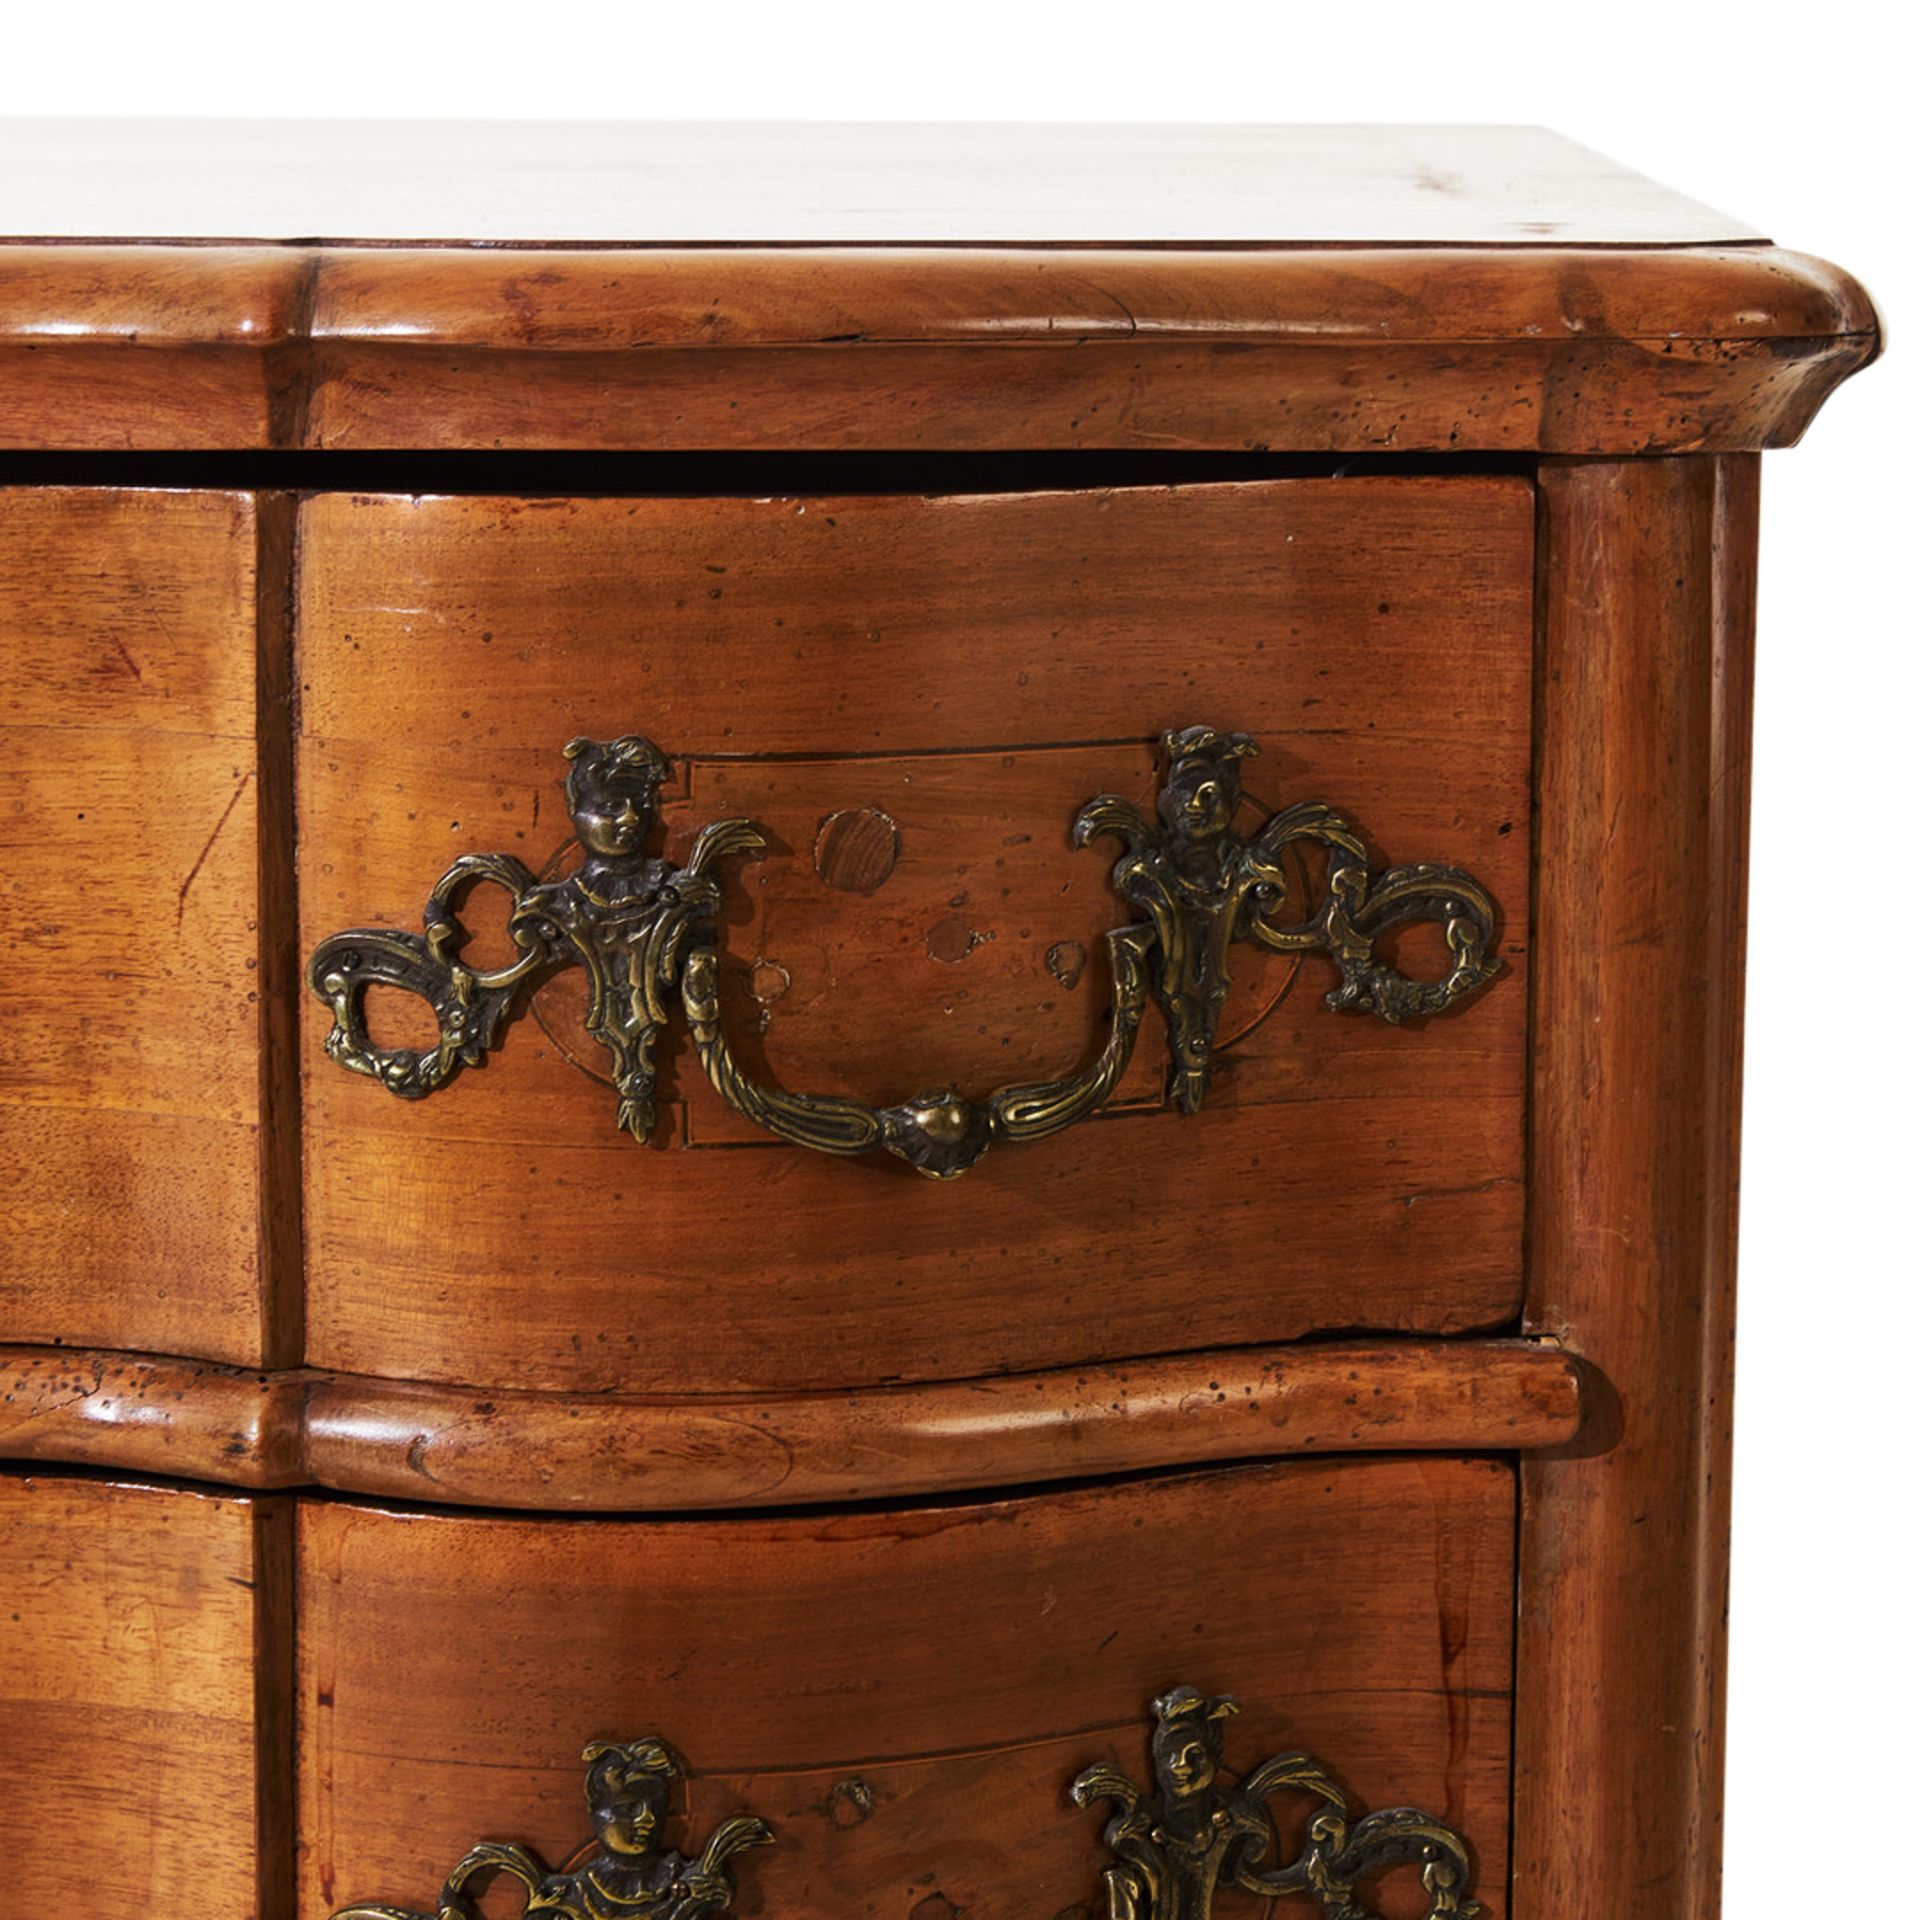 AN 18TH CENTURY ITALIAN WALNUT SERPENTINE CHEST OF DRAWERS - Image 3 of 8